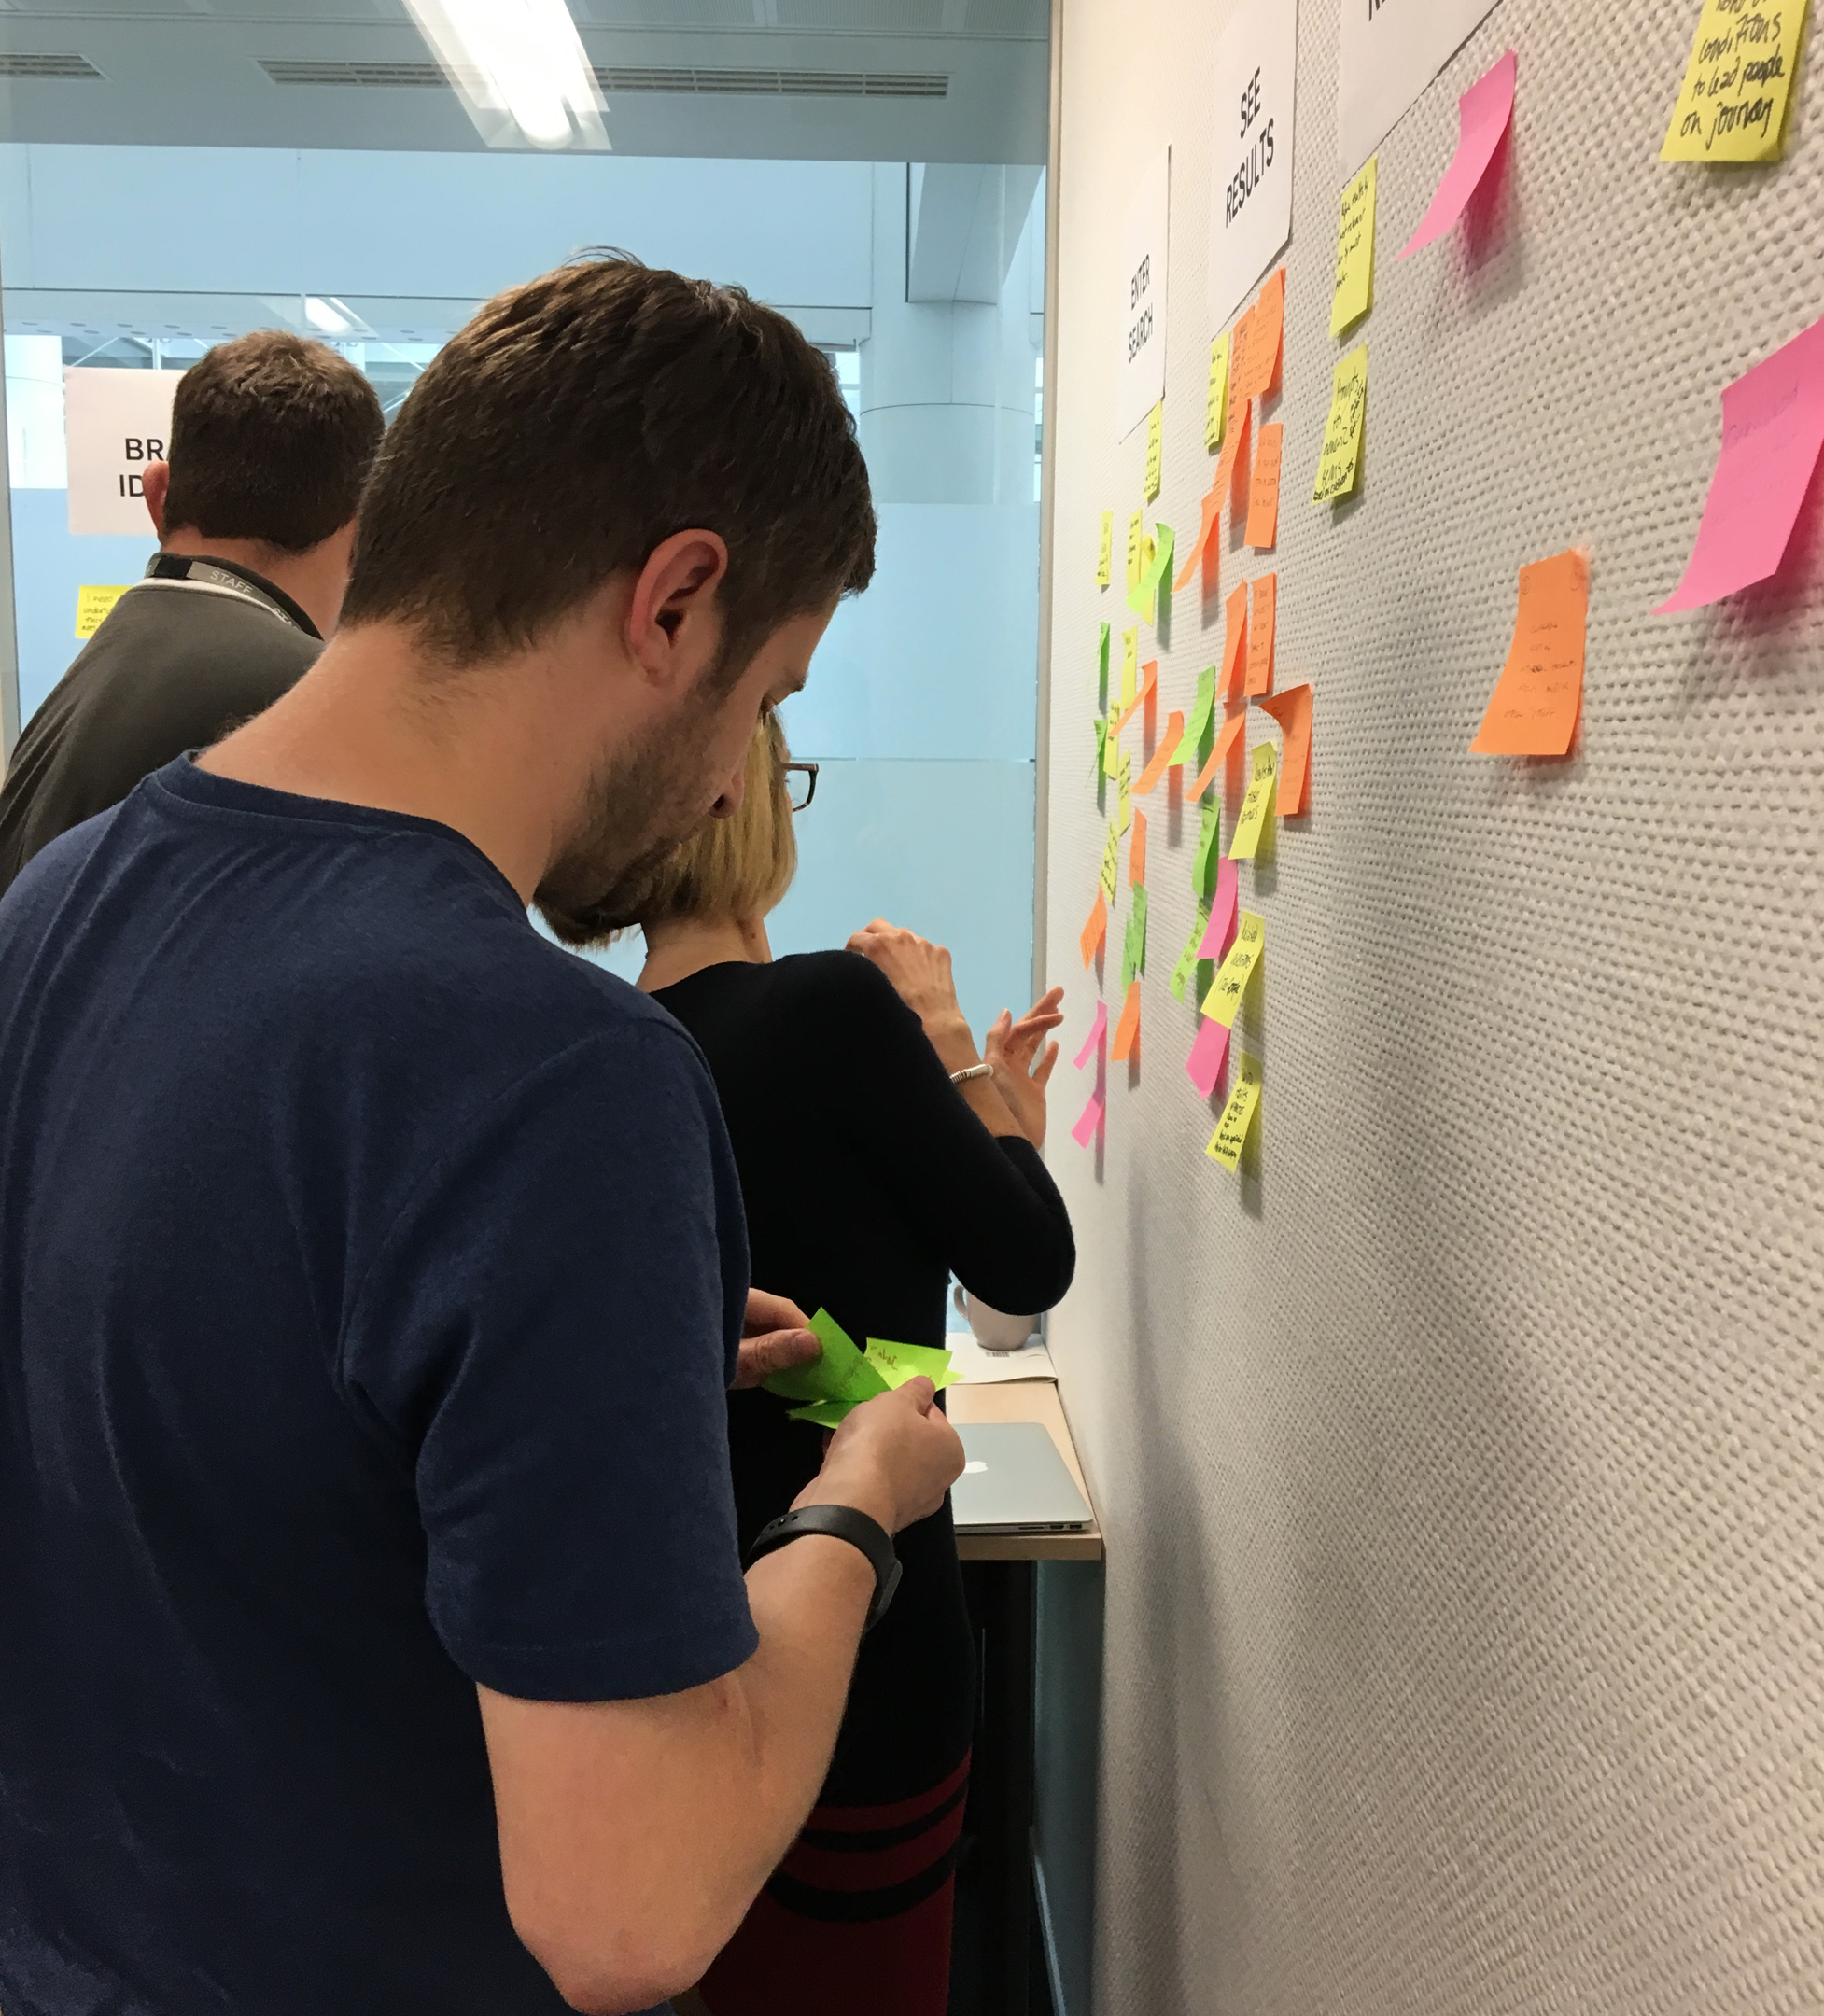 People looking at post-it notes on a wall